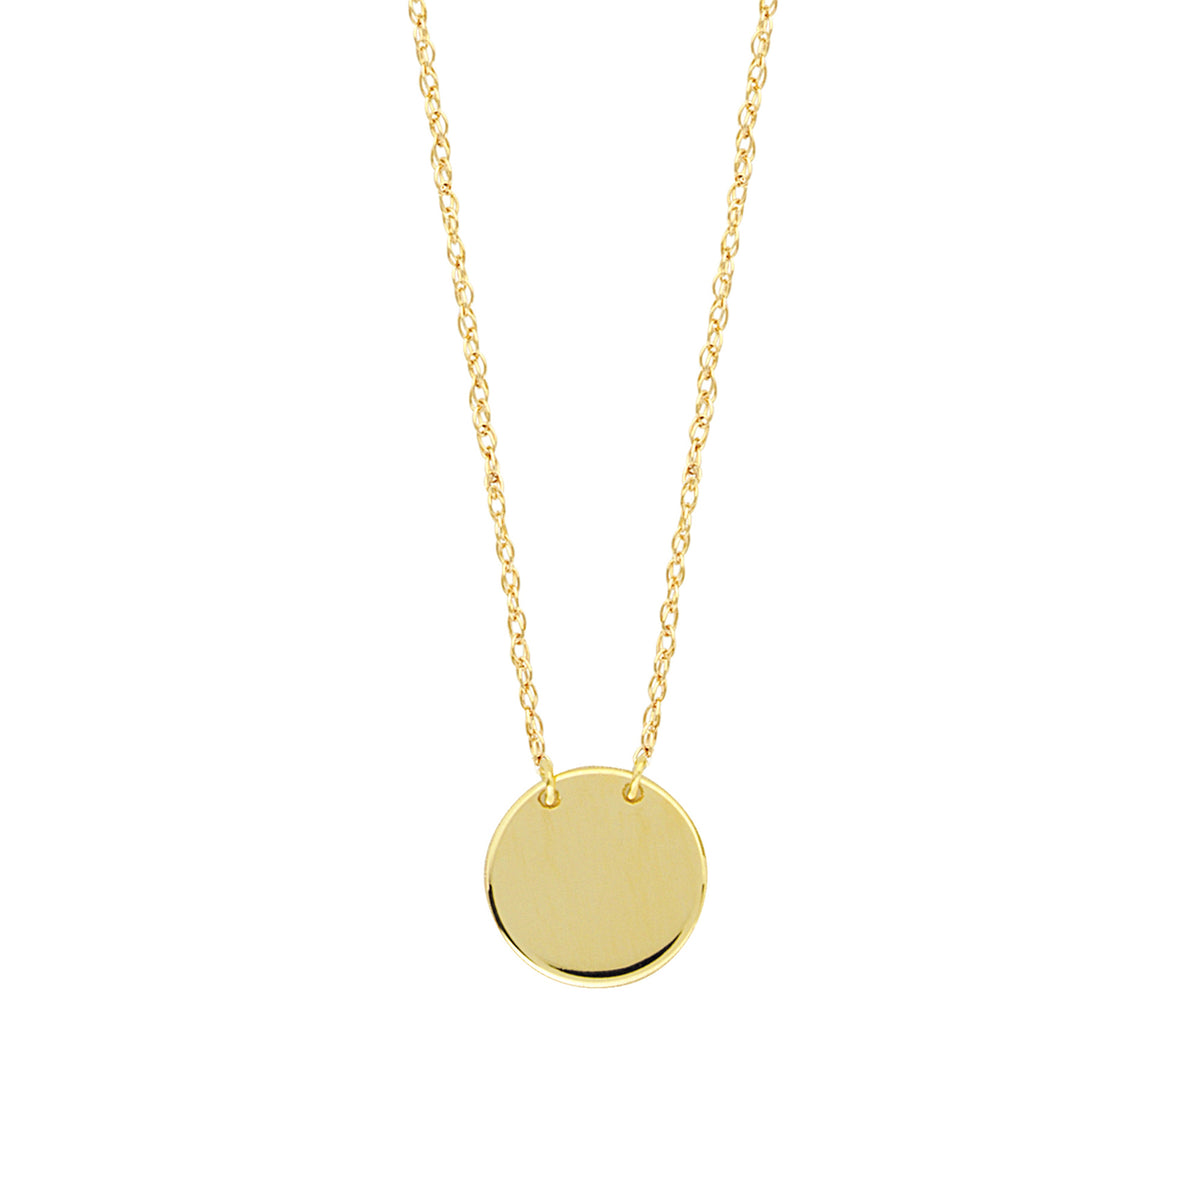 14K Yellow Gold Mini Engravable Disk Pendant Necklace, 16" To 18" Adjustable